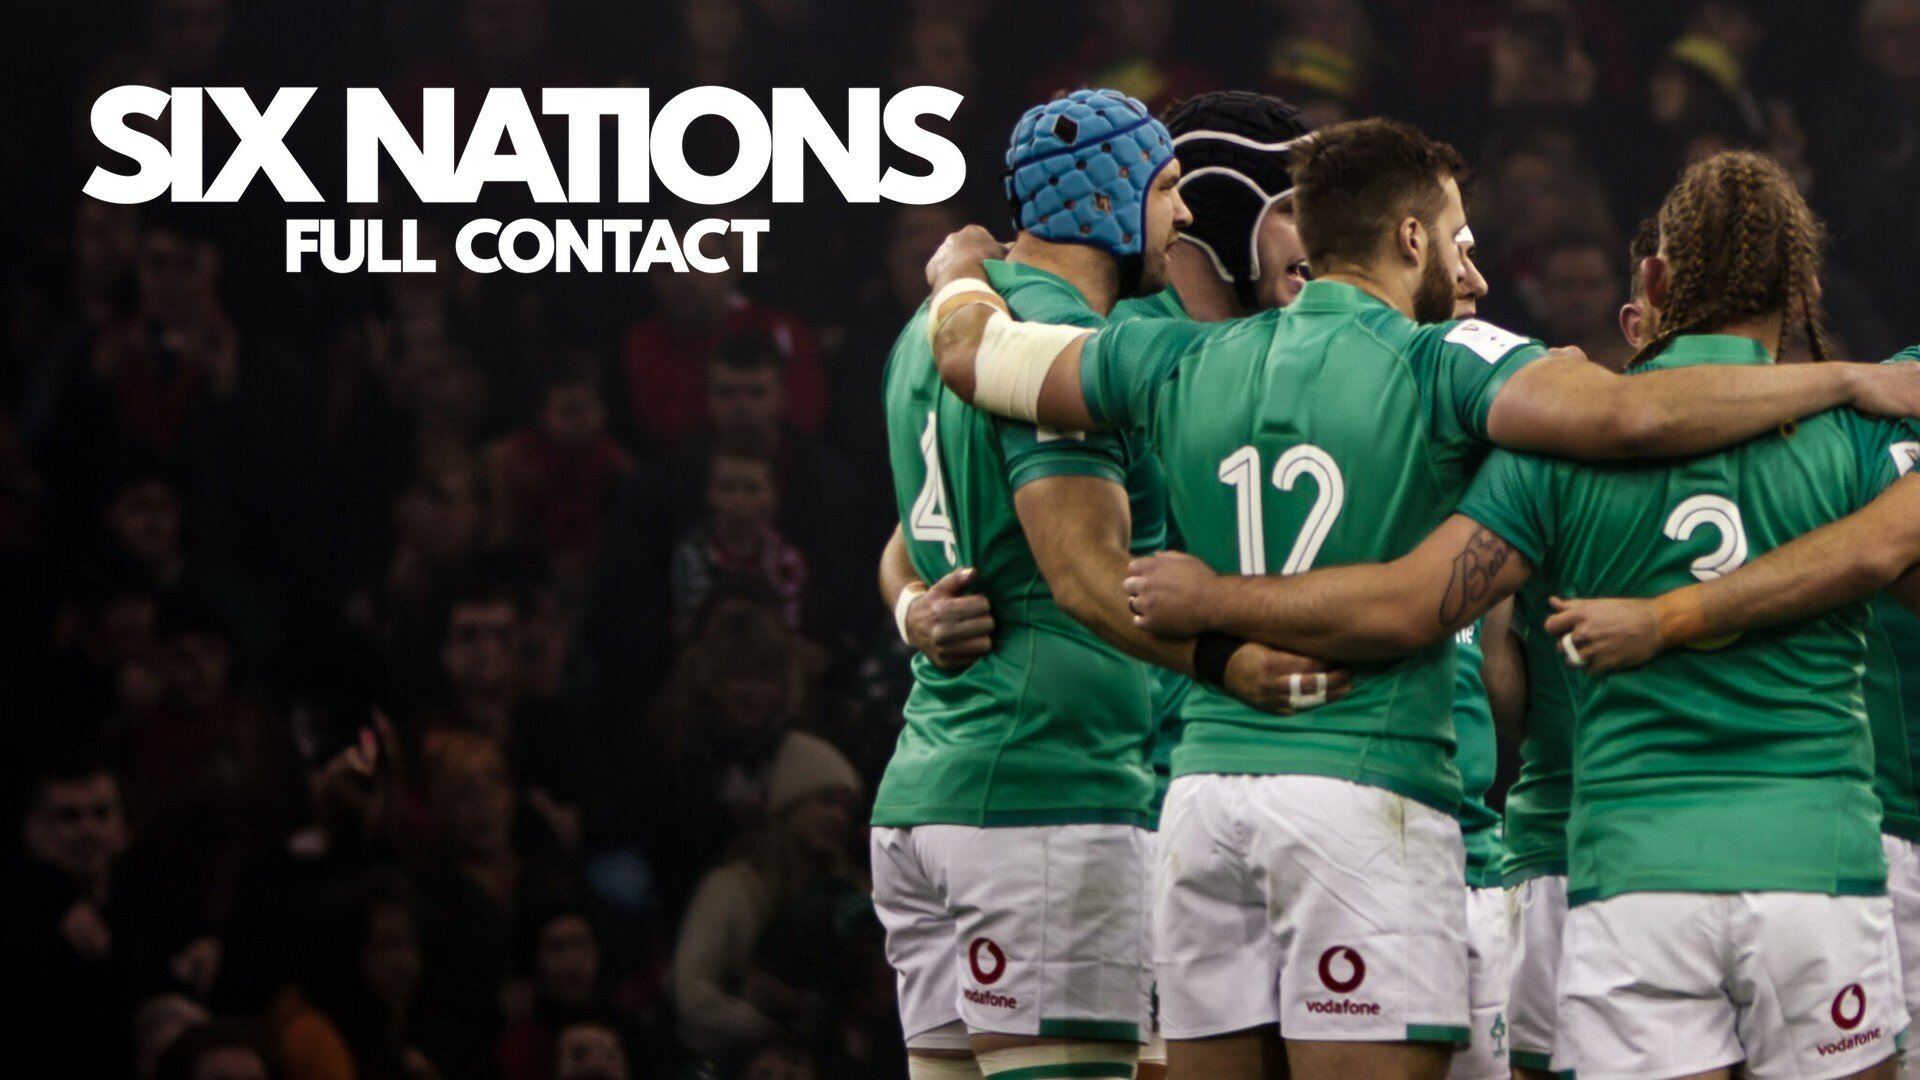 Show Six Nations: Full Contact